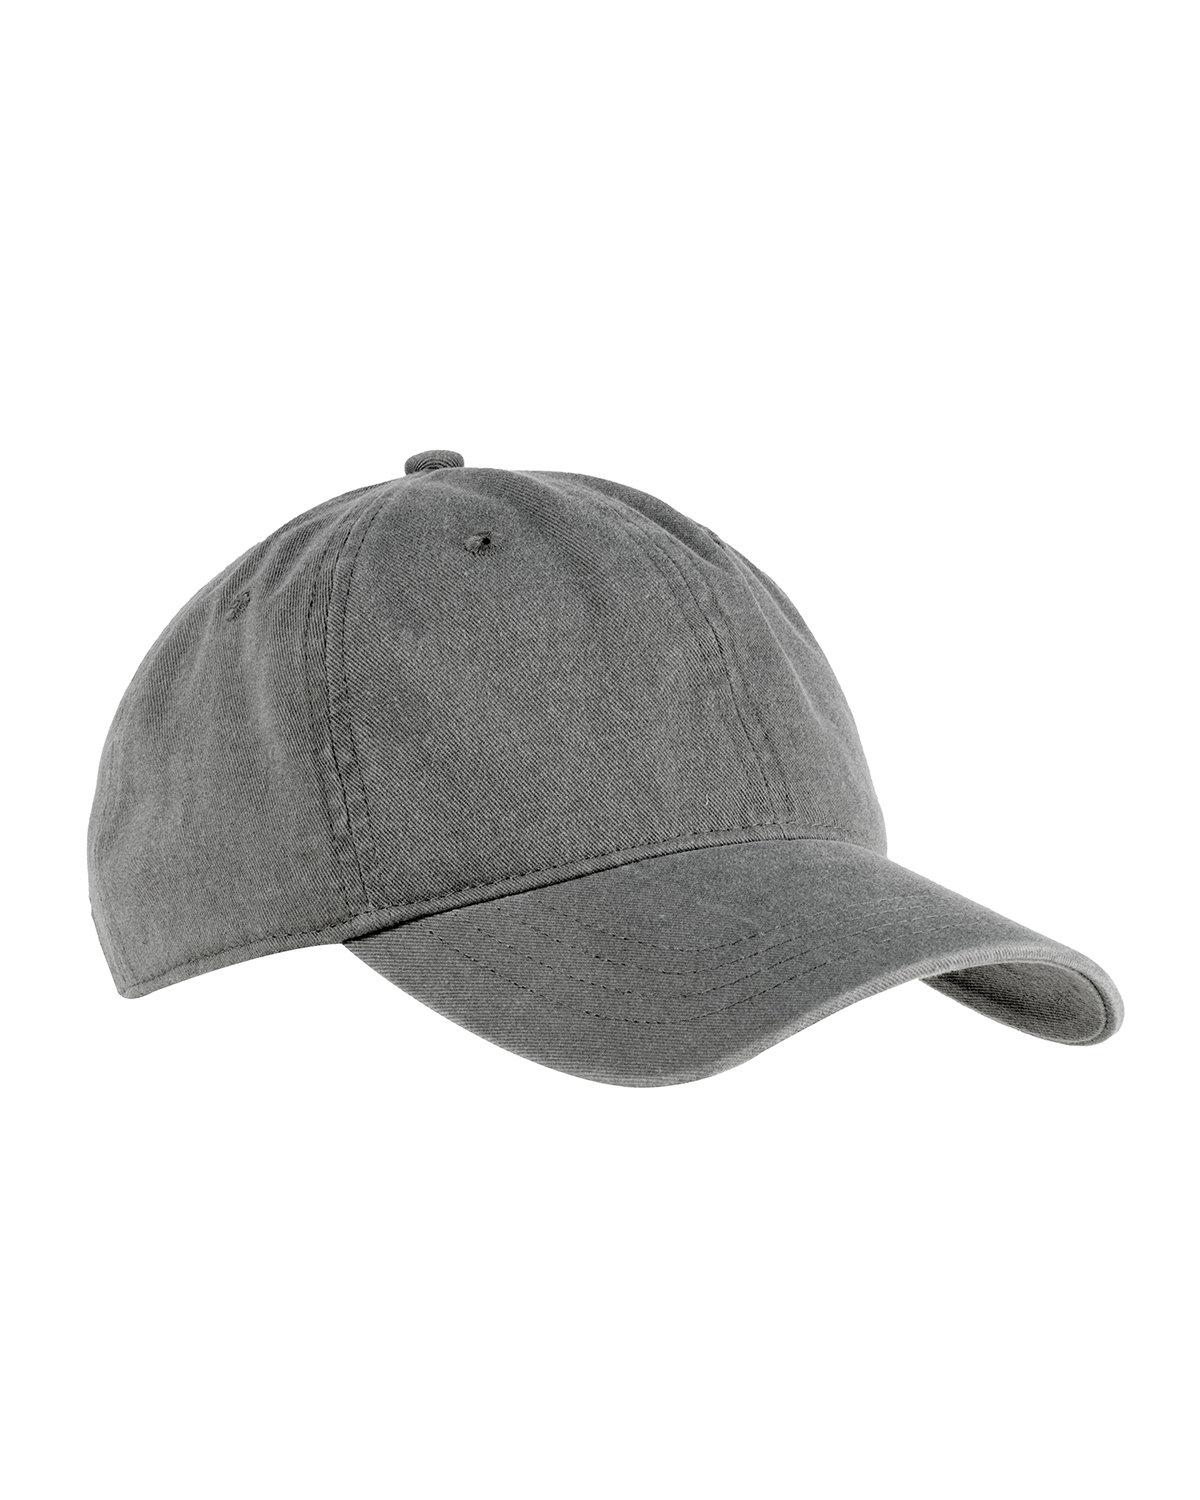 Authentic Pigment Pigment-Dyed Baseball Cap | alphabroder